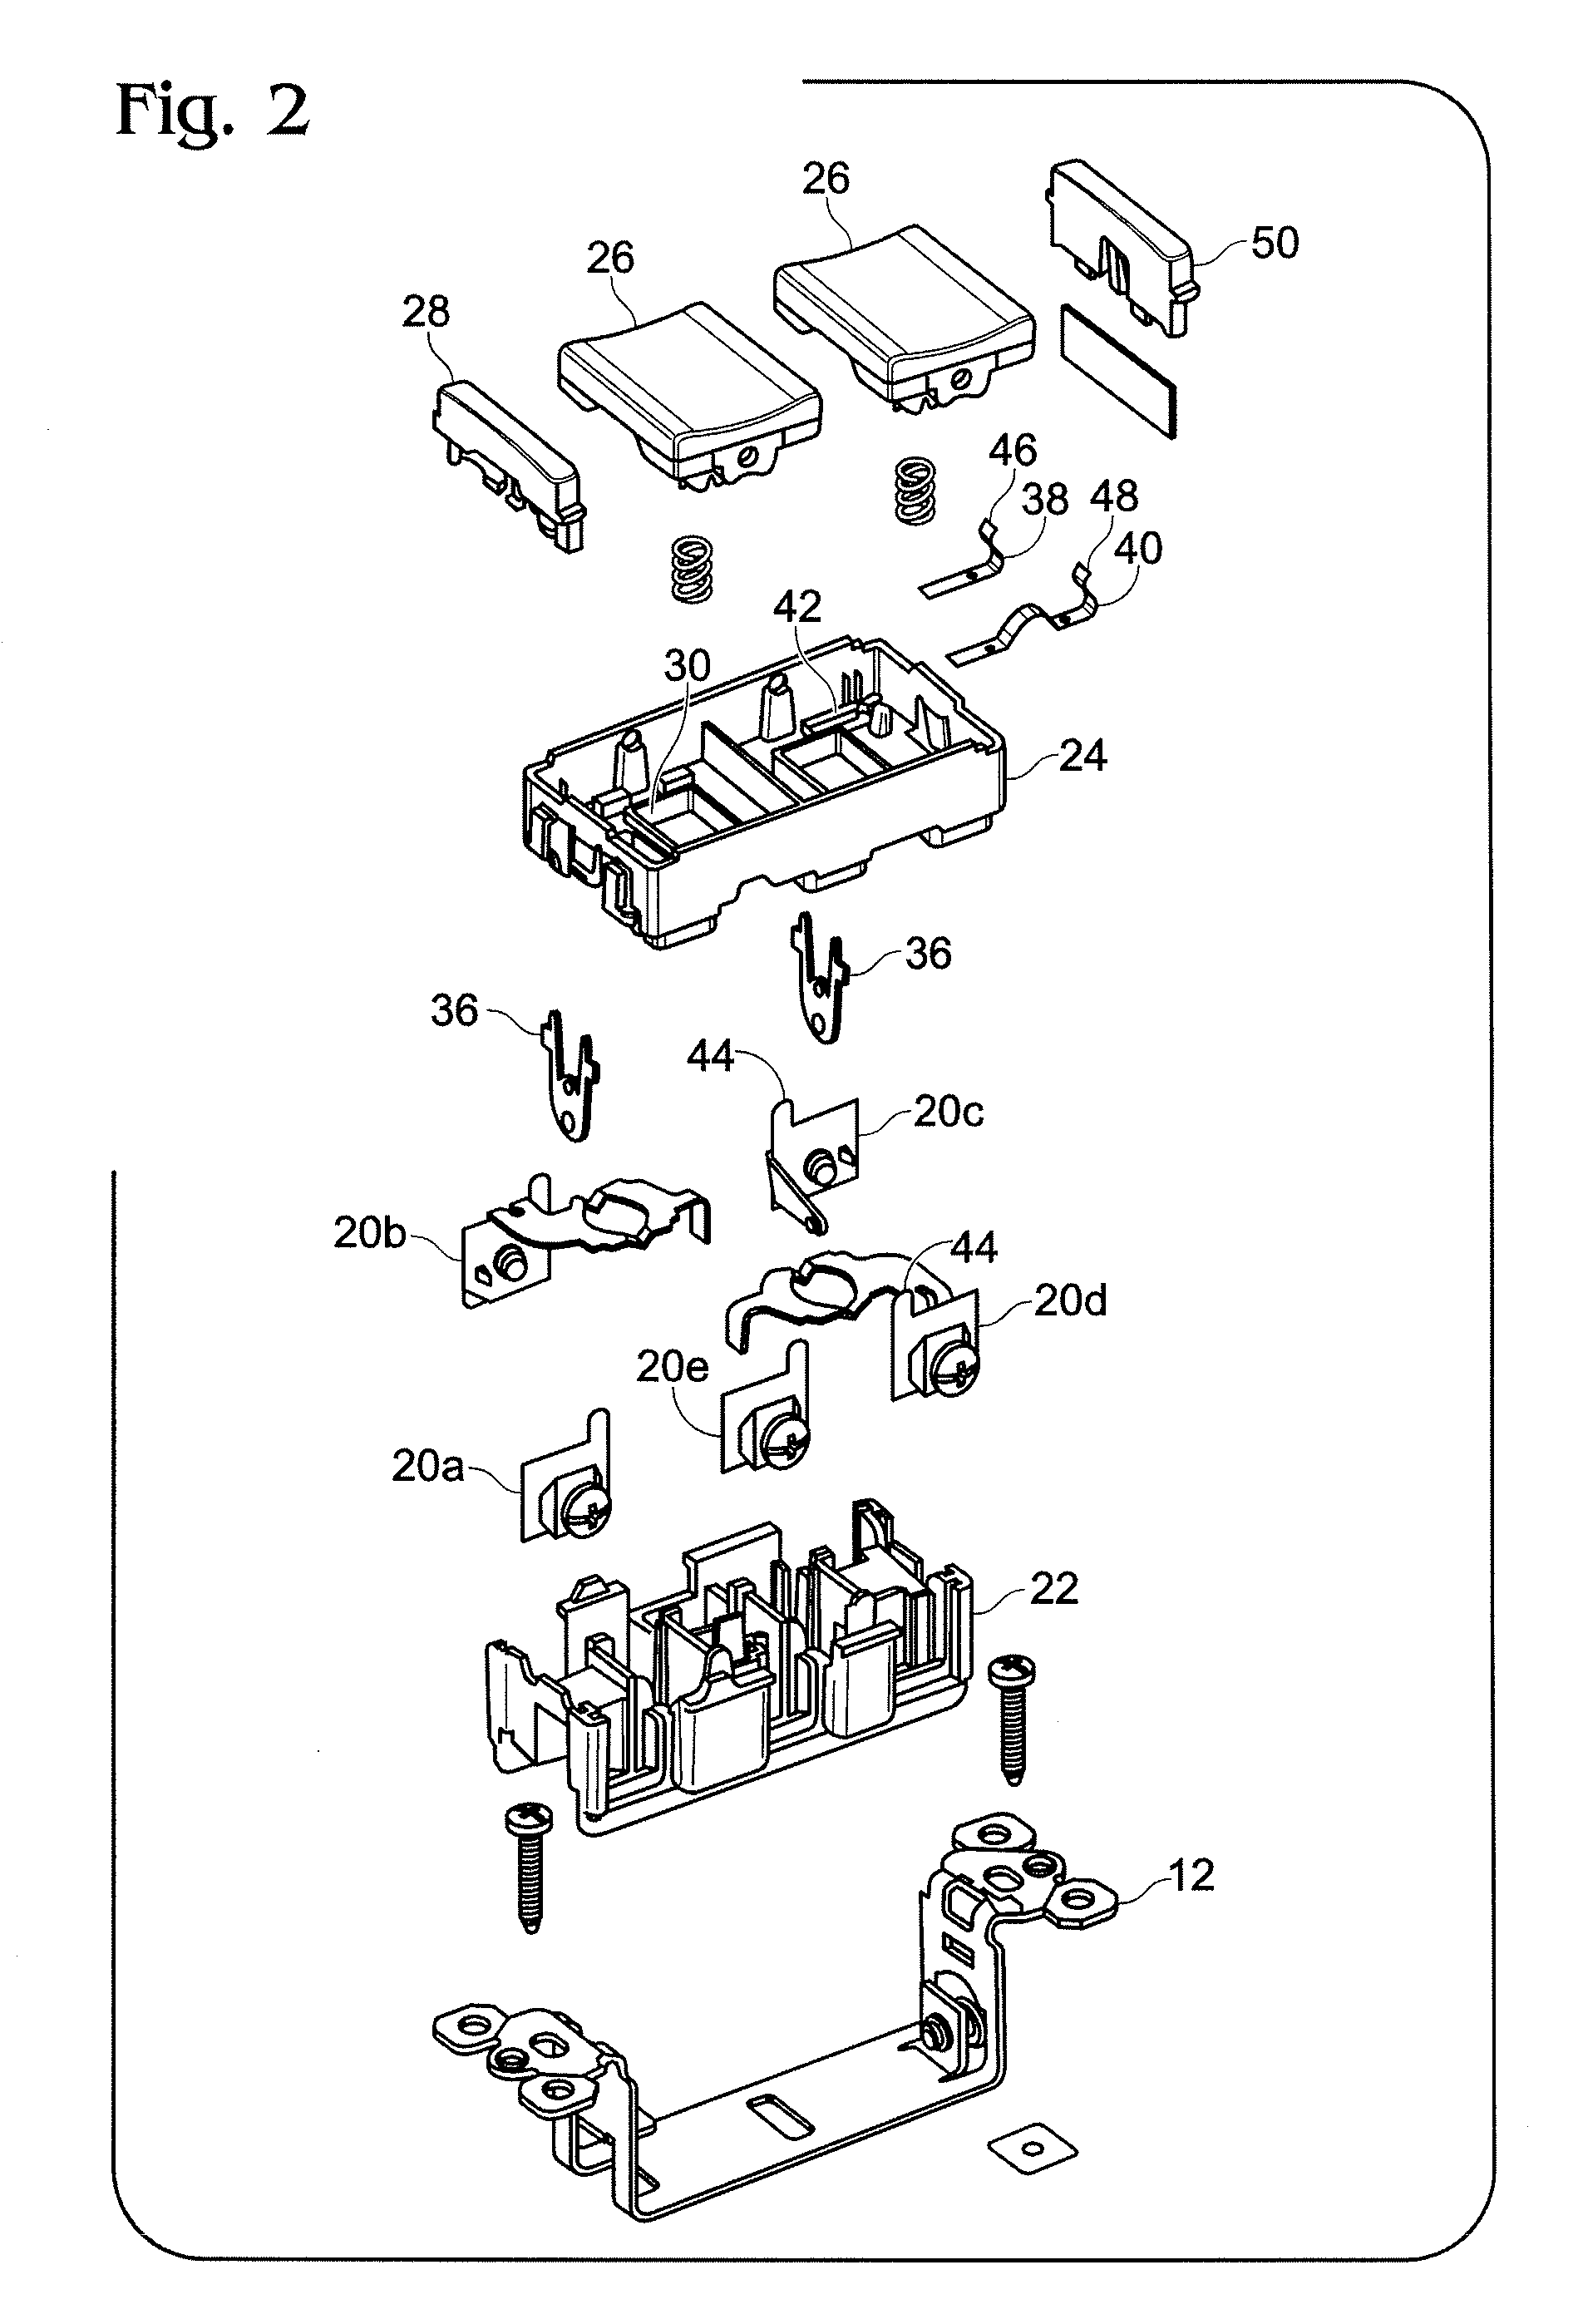 Electrical device with lamp module